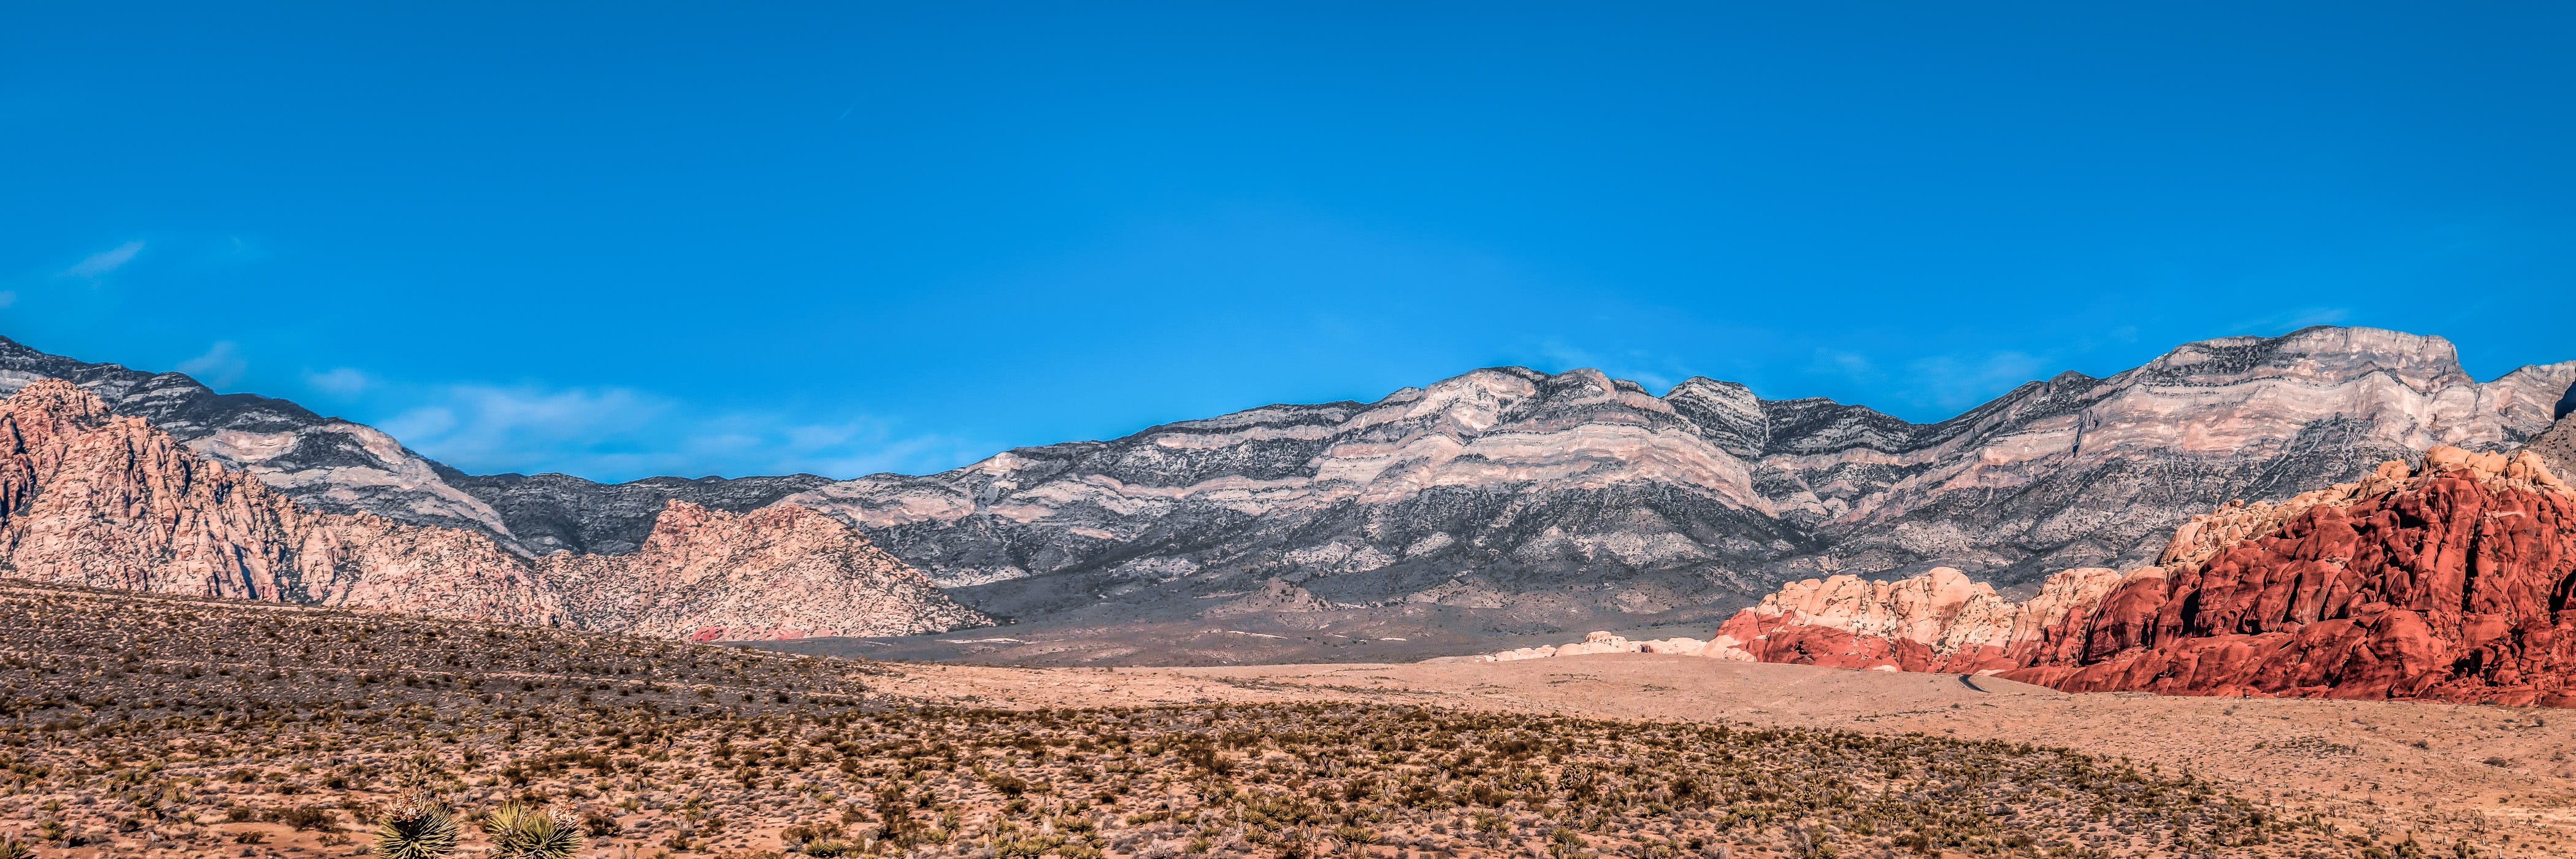 A sweeping panorama of the desert landscape of Nevada's Red Rock Canyon National Conservation Area.